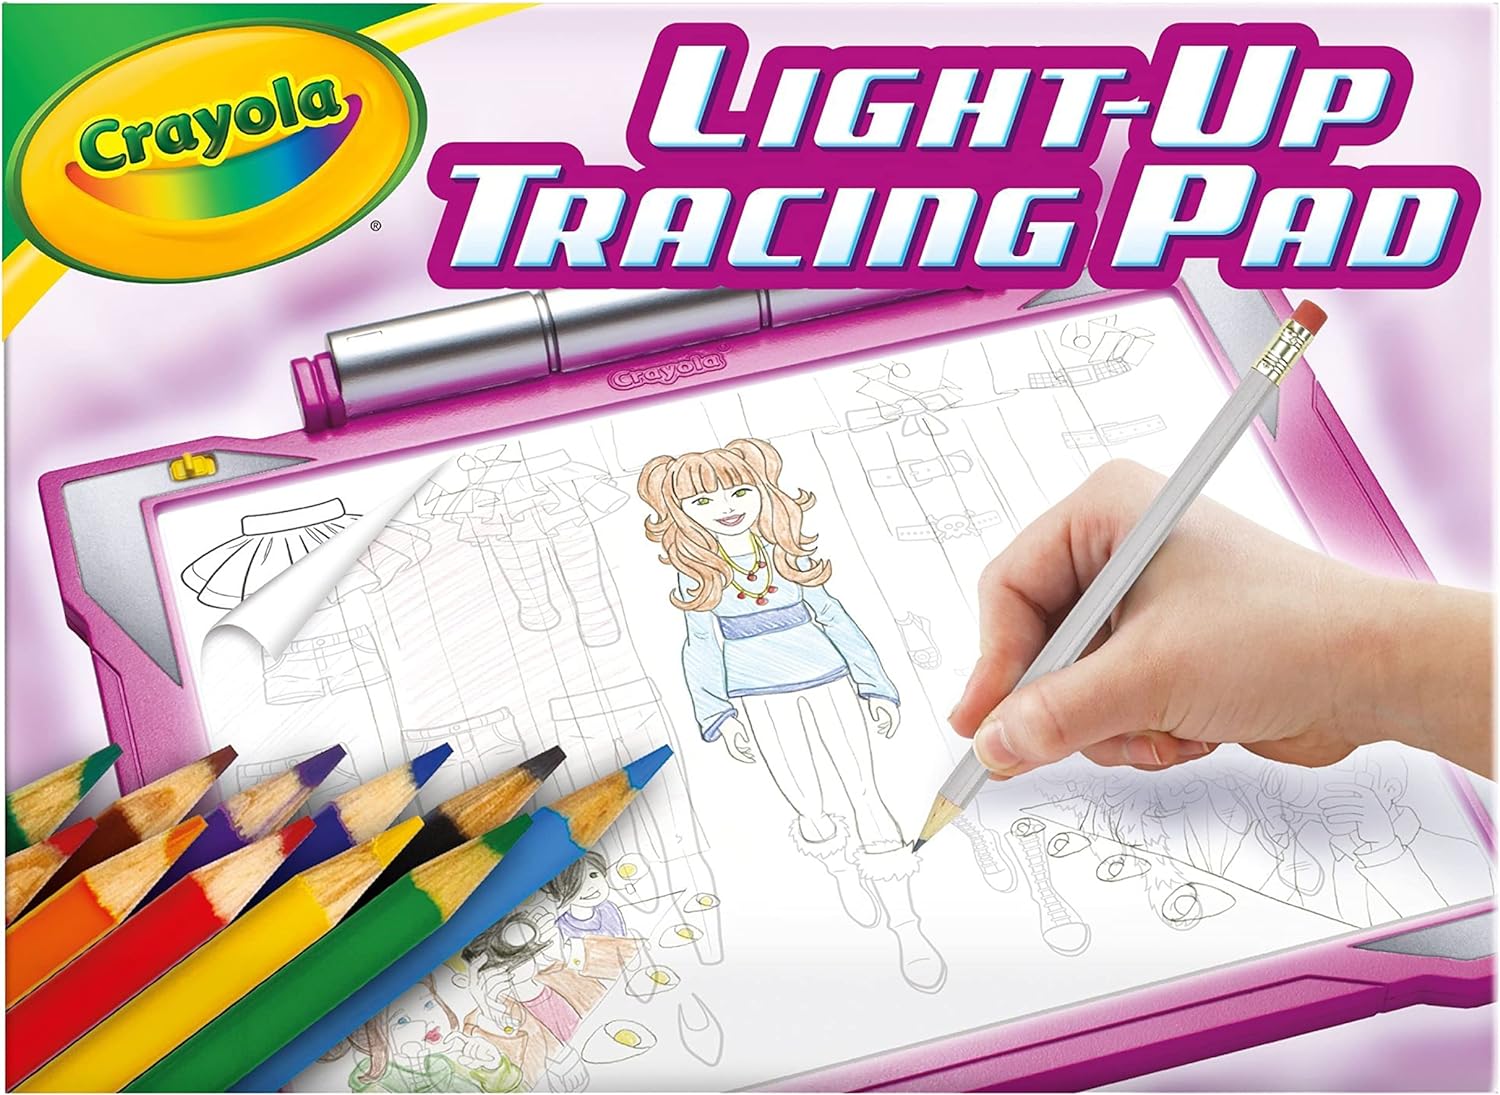 Crayola Light-up Tracing Pad, Pink Tablet, Colouring Board for Kids, Light Box with Bright LEDs, Easy Tracing with Included Tools!